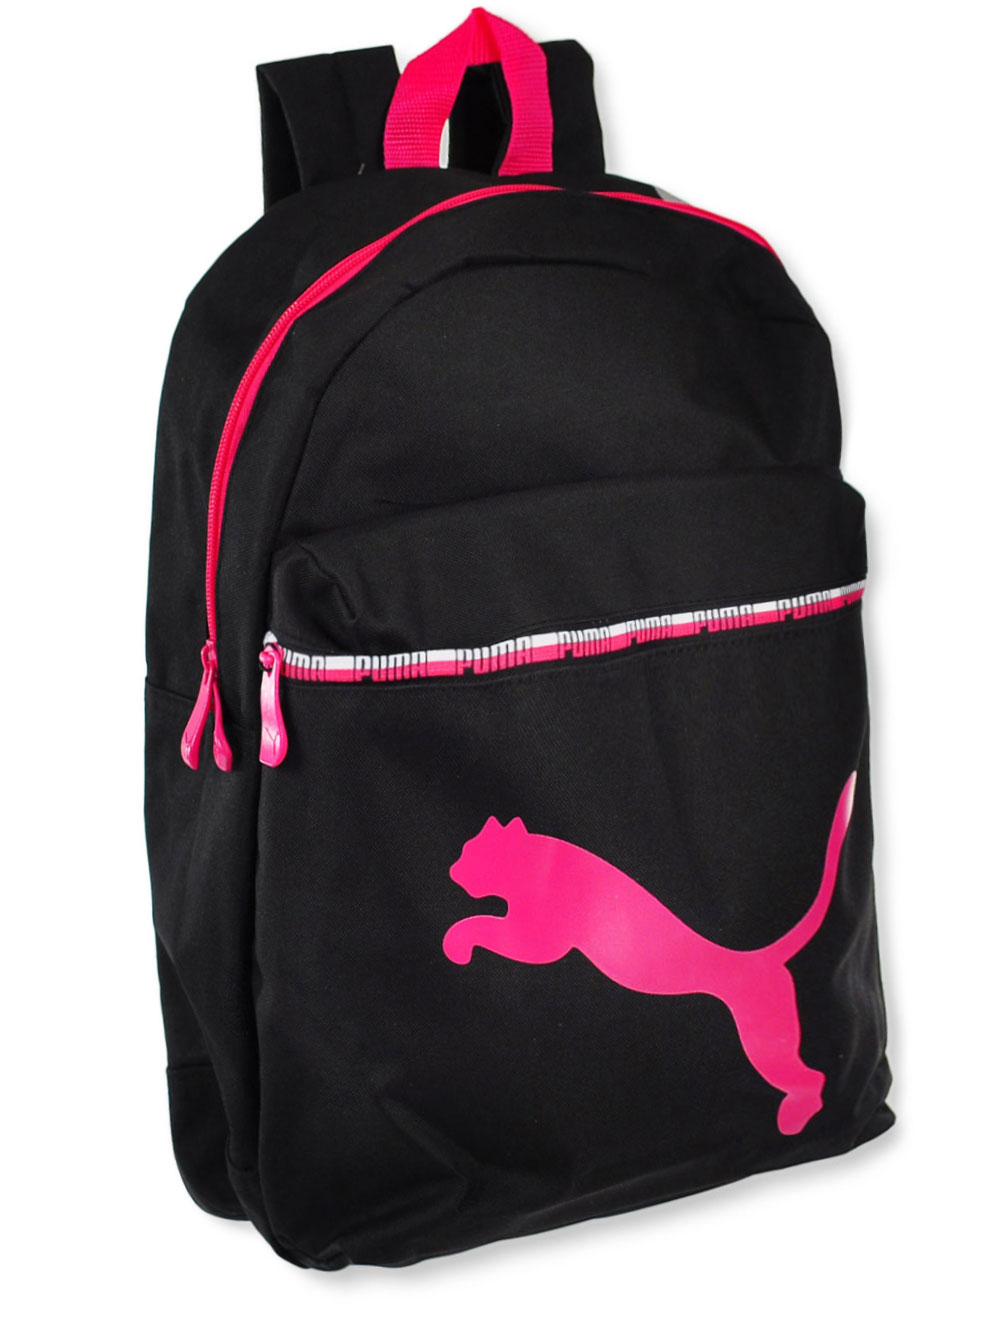 Backpack by Puma in Black/pink from 